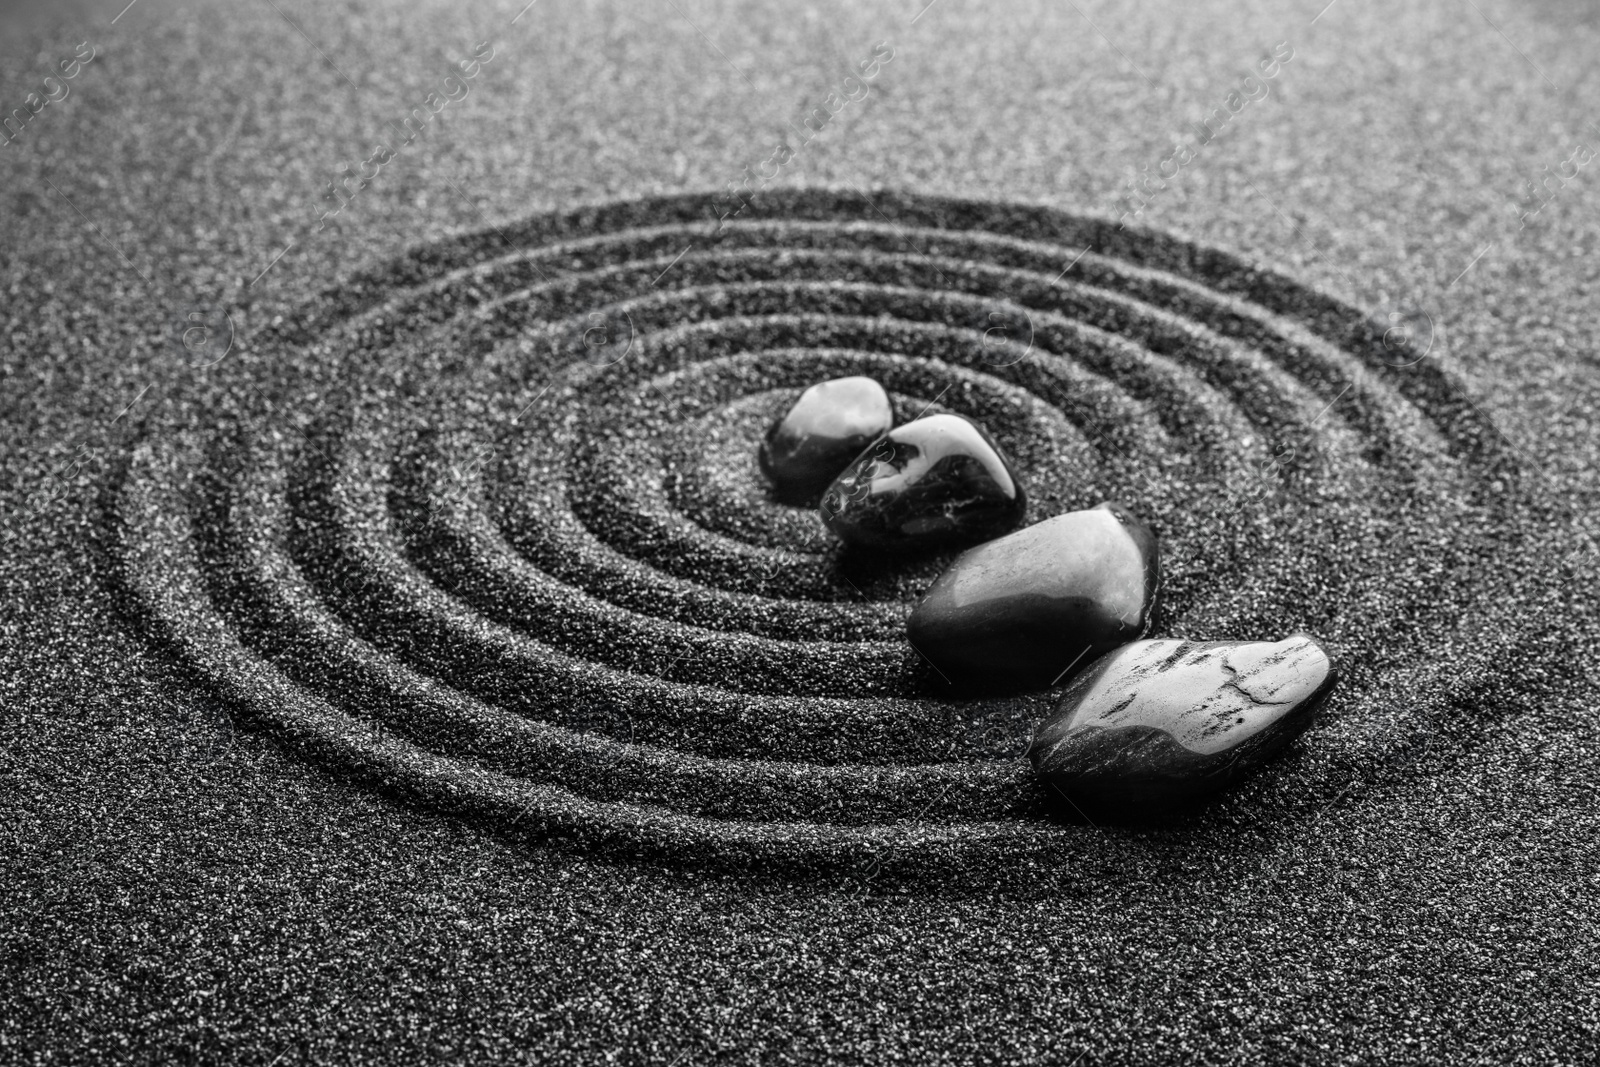 Photo of Black sand with stones and beautiful pattern. Zen concept